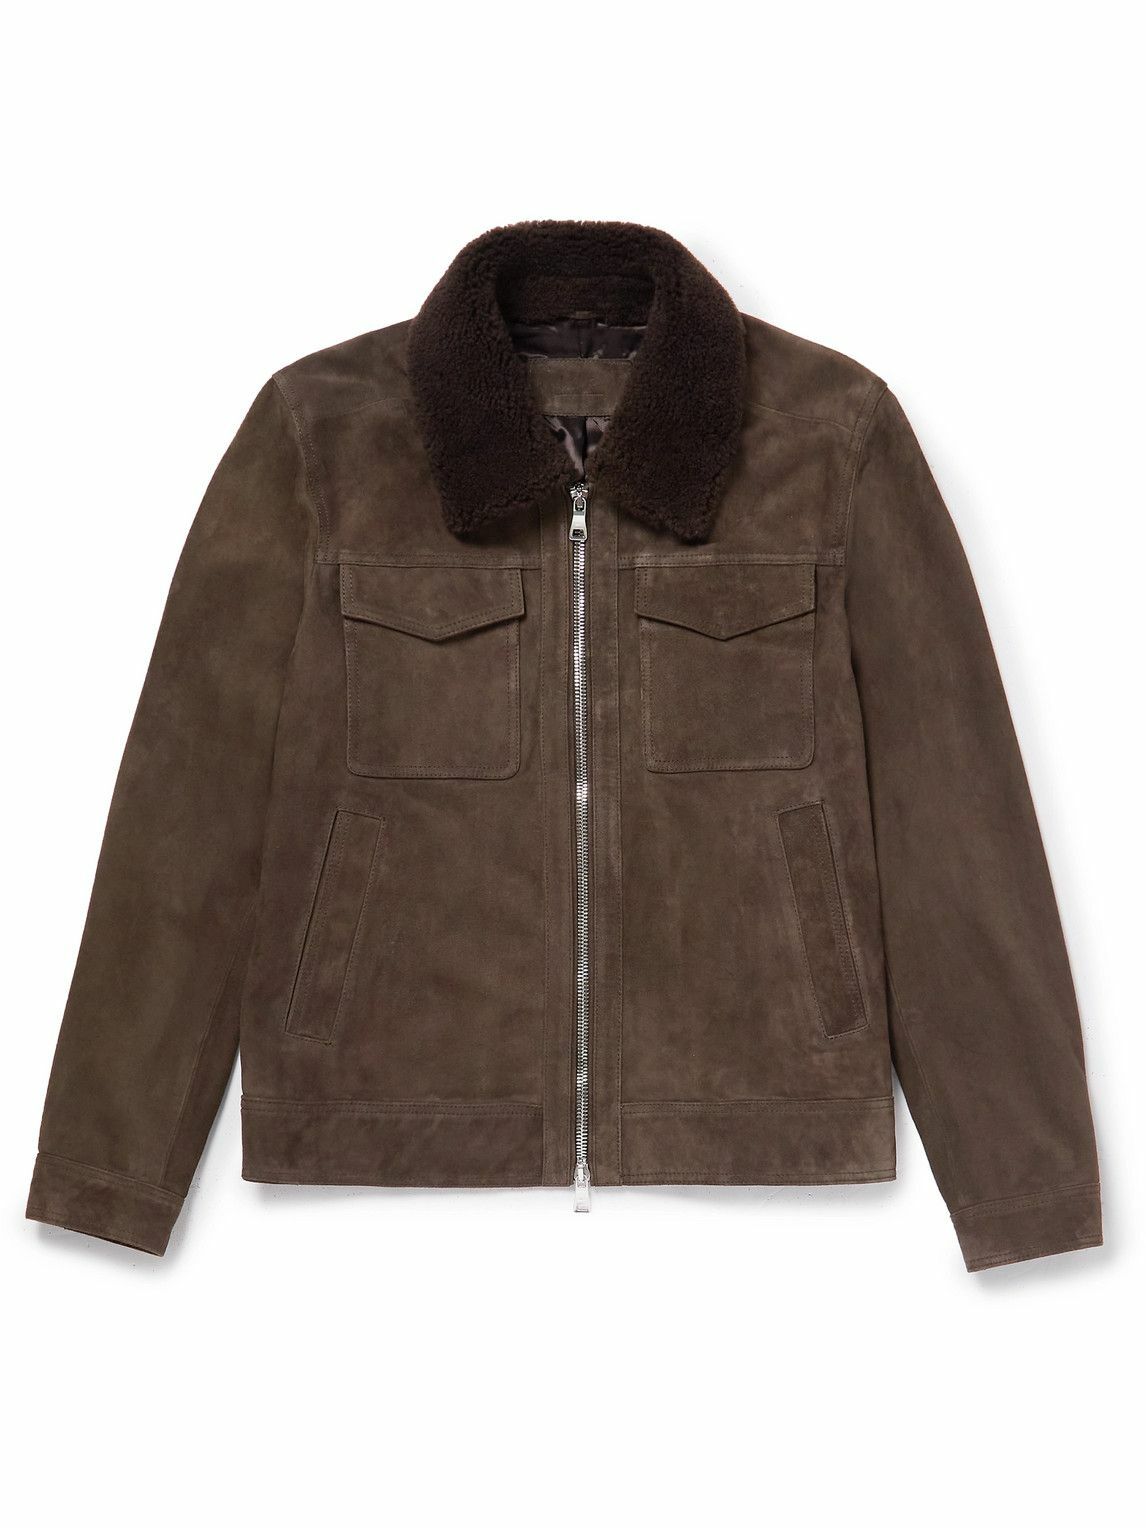 Photo: Mr P. - Shearling-Trimmed Suede Trucker Jacket - Brown